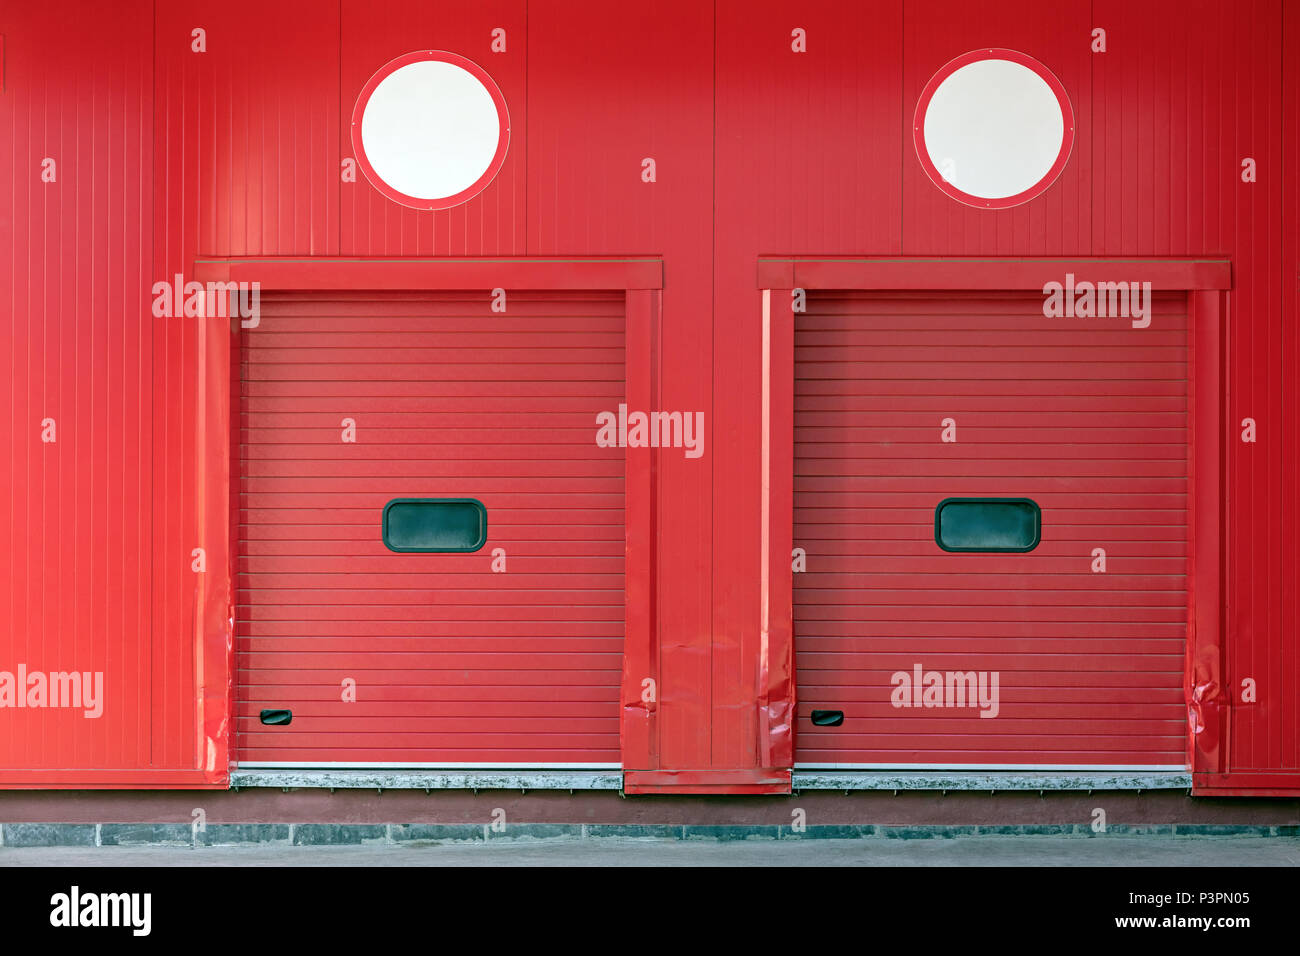 loading docks with closed shutter doors on red wall of distribution warehouse Stock Photo